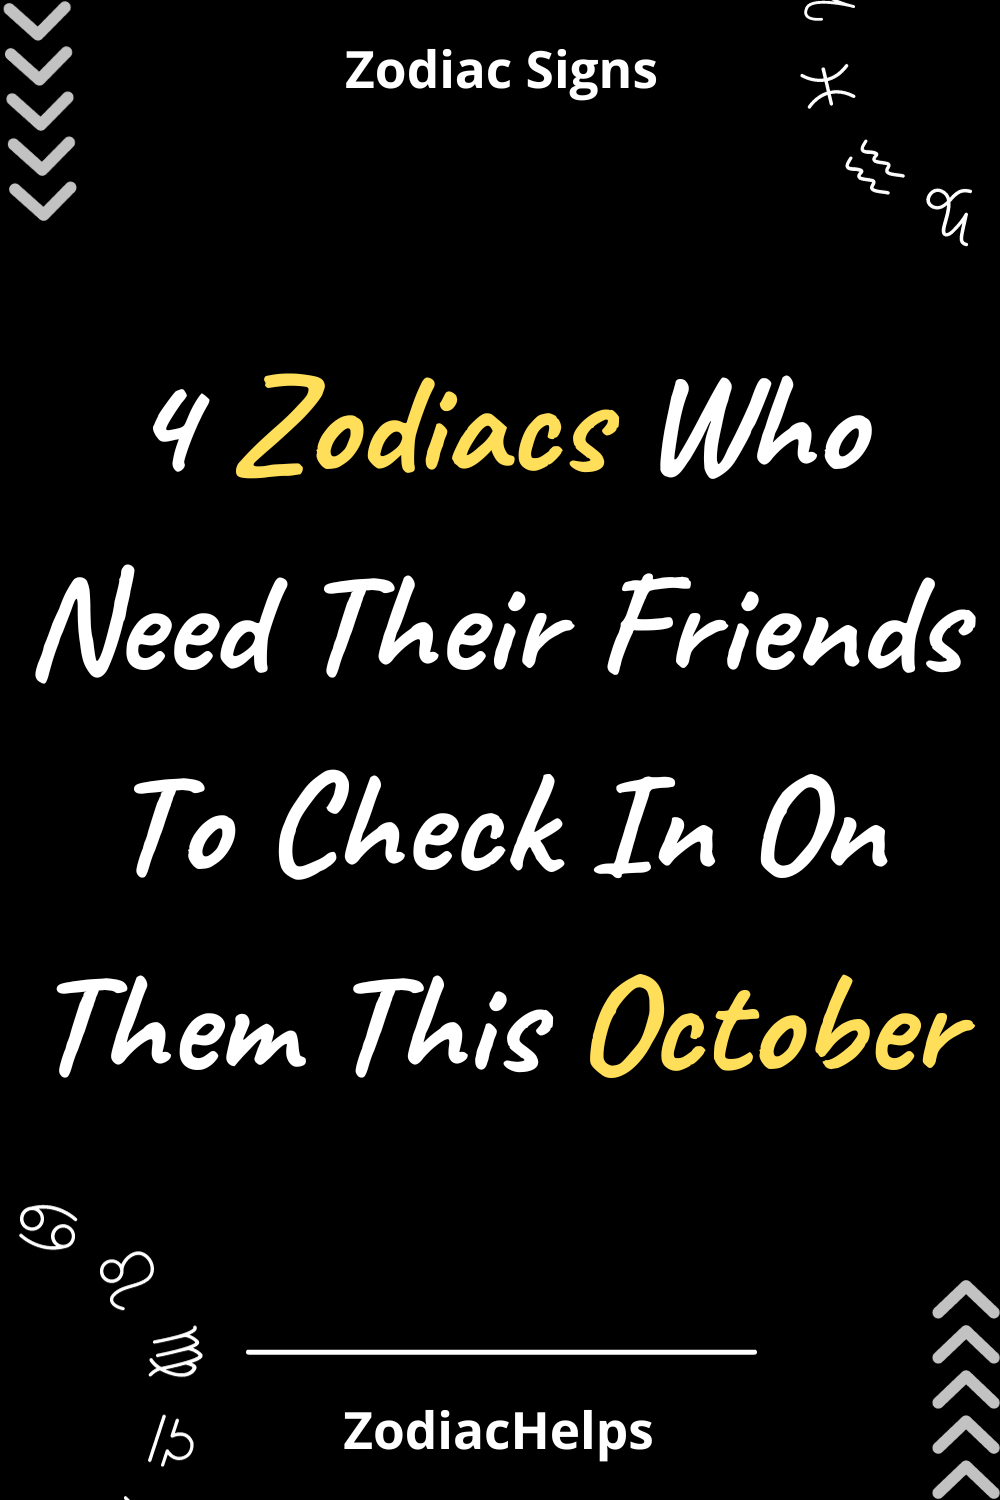 4 Zodiacs Who Need Their Friends To Check In On Them This October